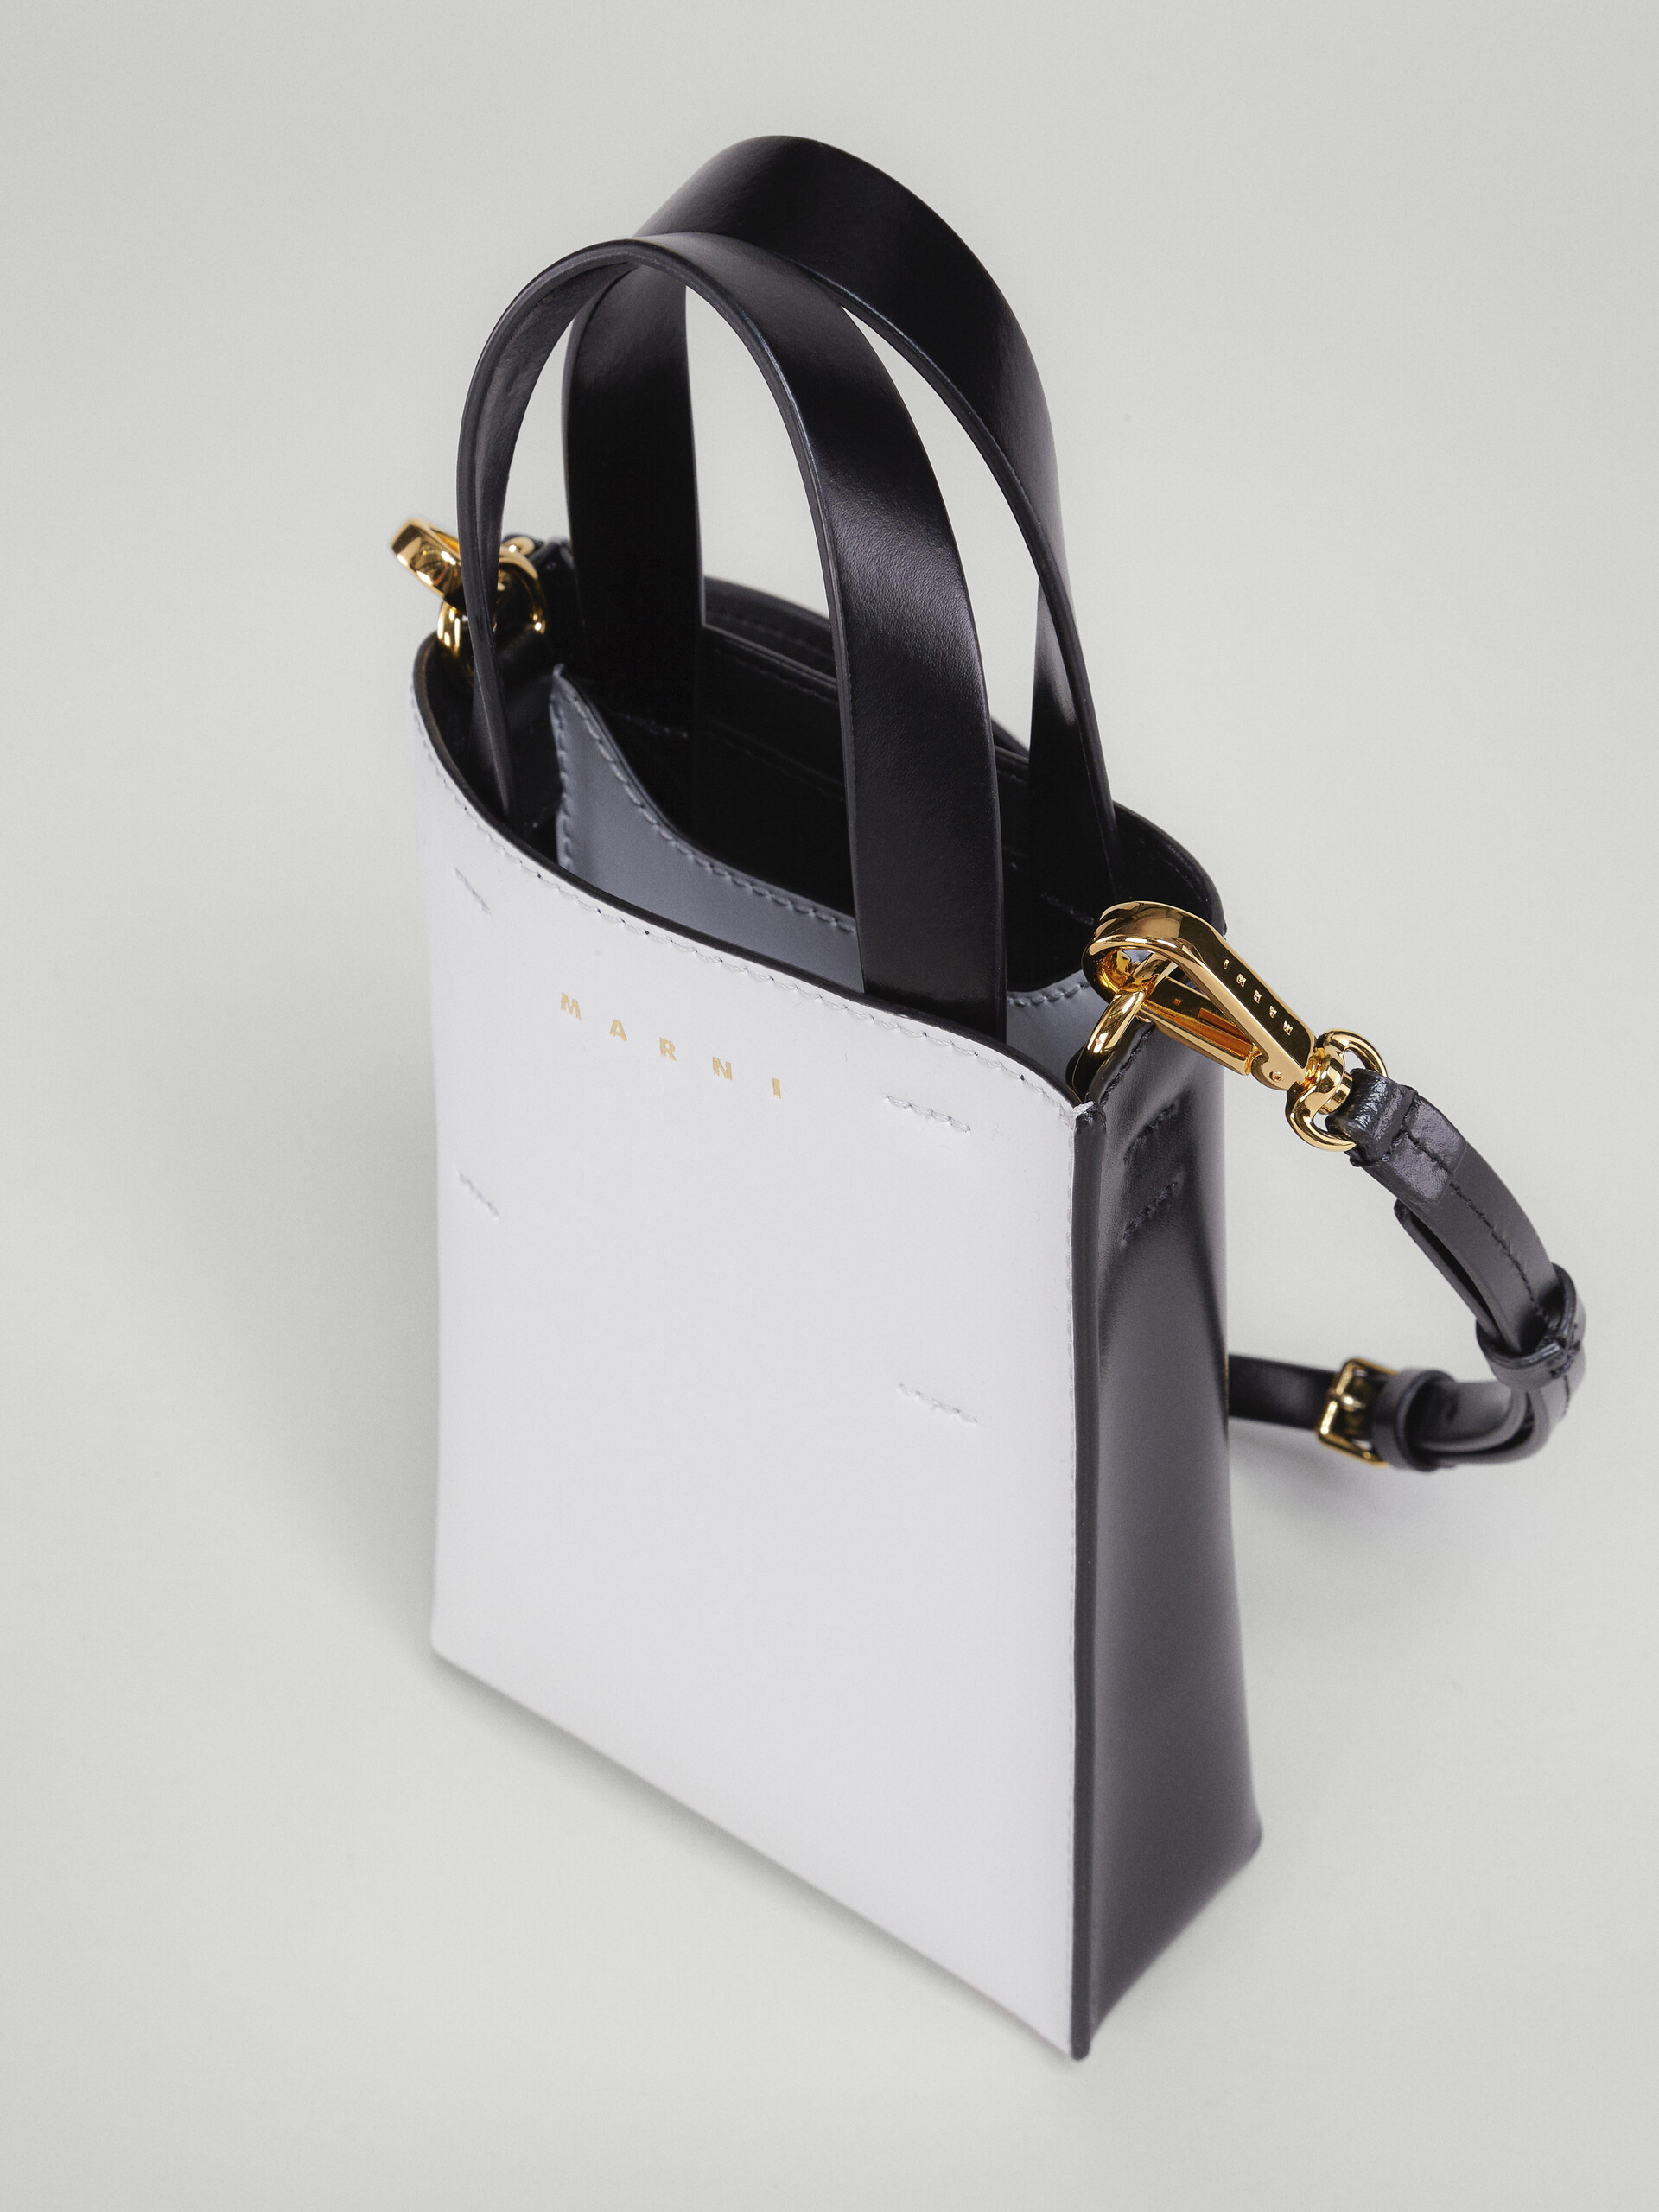 MUSEO nano bag in white and black leather - Shopping Bags - Image 4